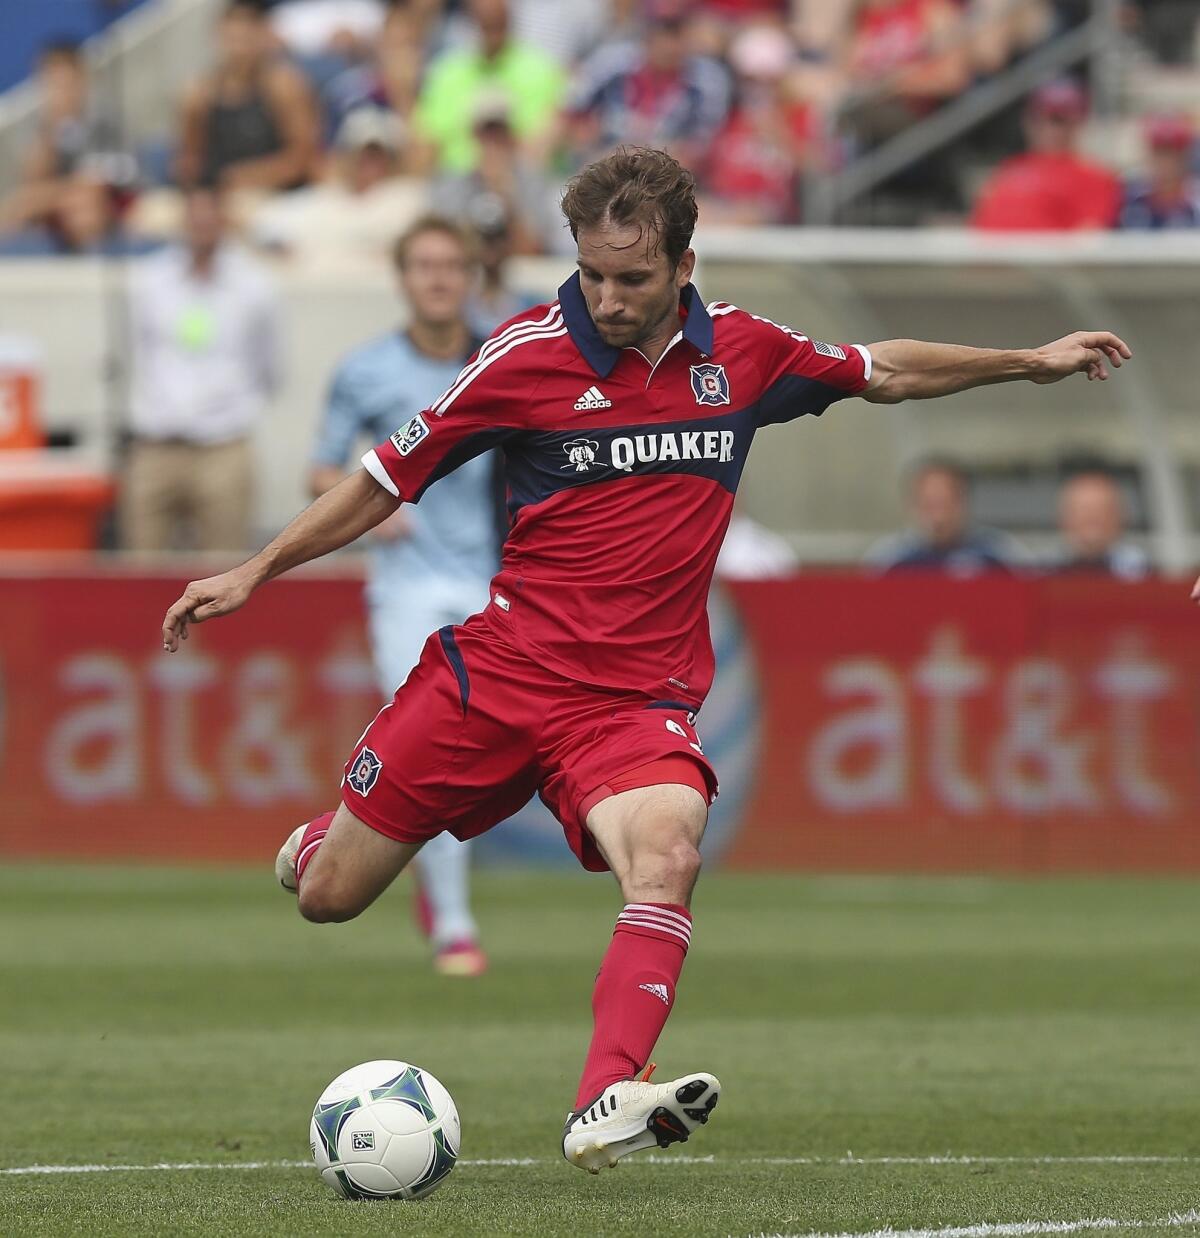 Mike Magee #9 of the Chicago Fire scores a first half goal against Sporting Kansas City during an MLS match at Toyota Park on July 7, 2013 in Bridgeview, Illinois. Sporting Kansas City defeated the Fire 2-1.